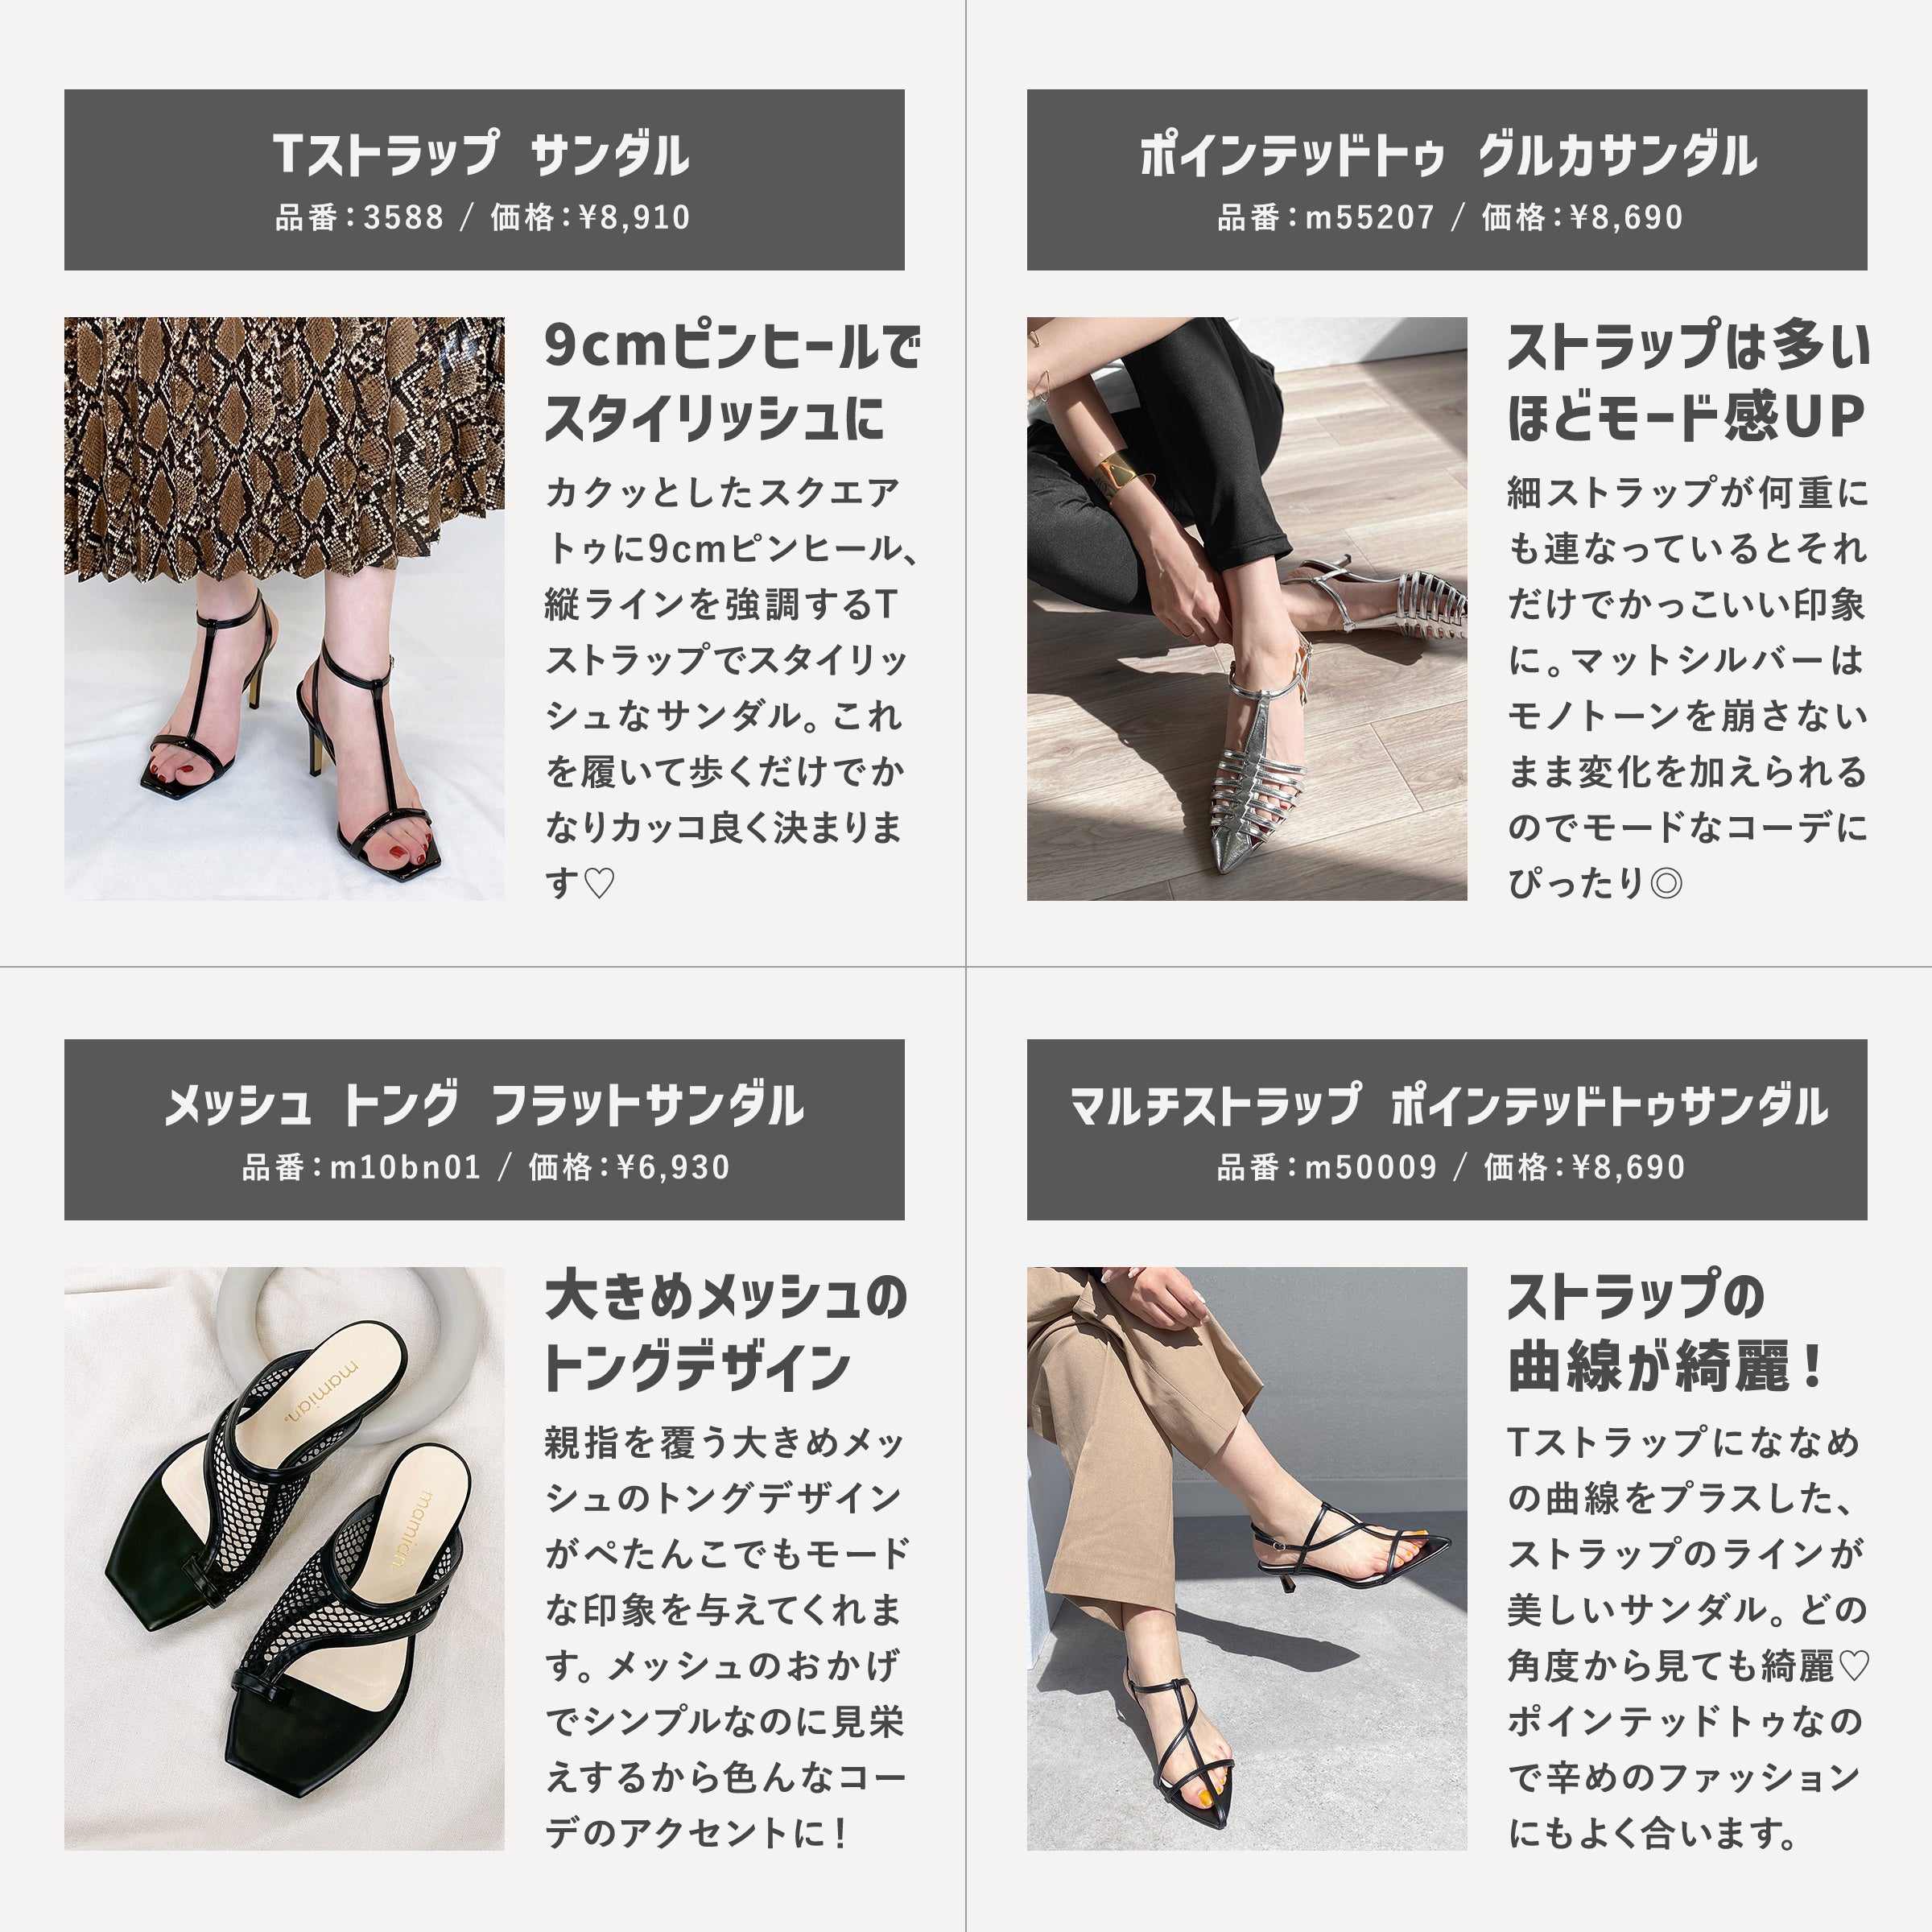 On the day when you want to look cool! Mode system sandals special feature